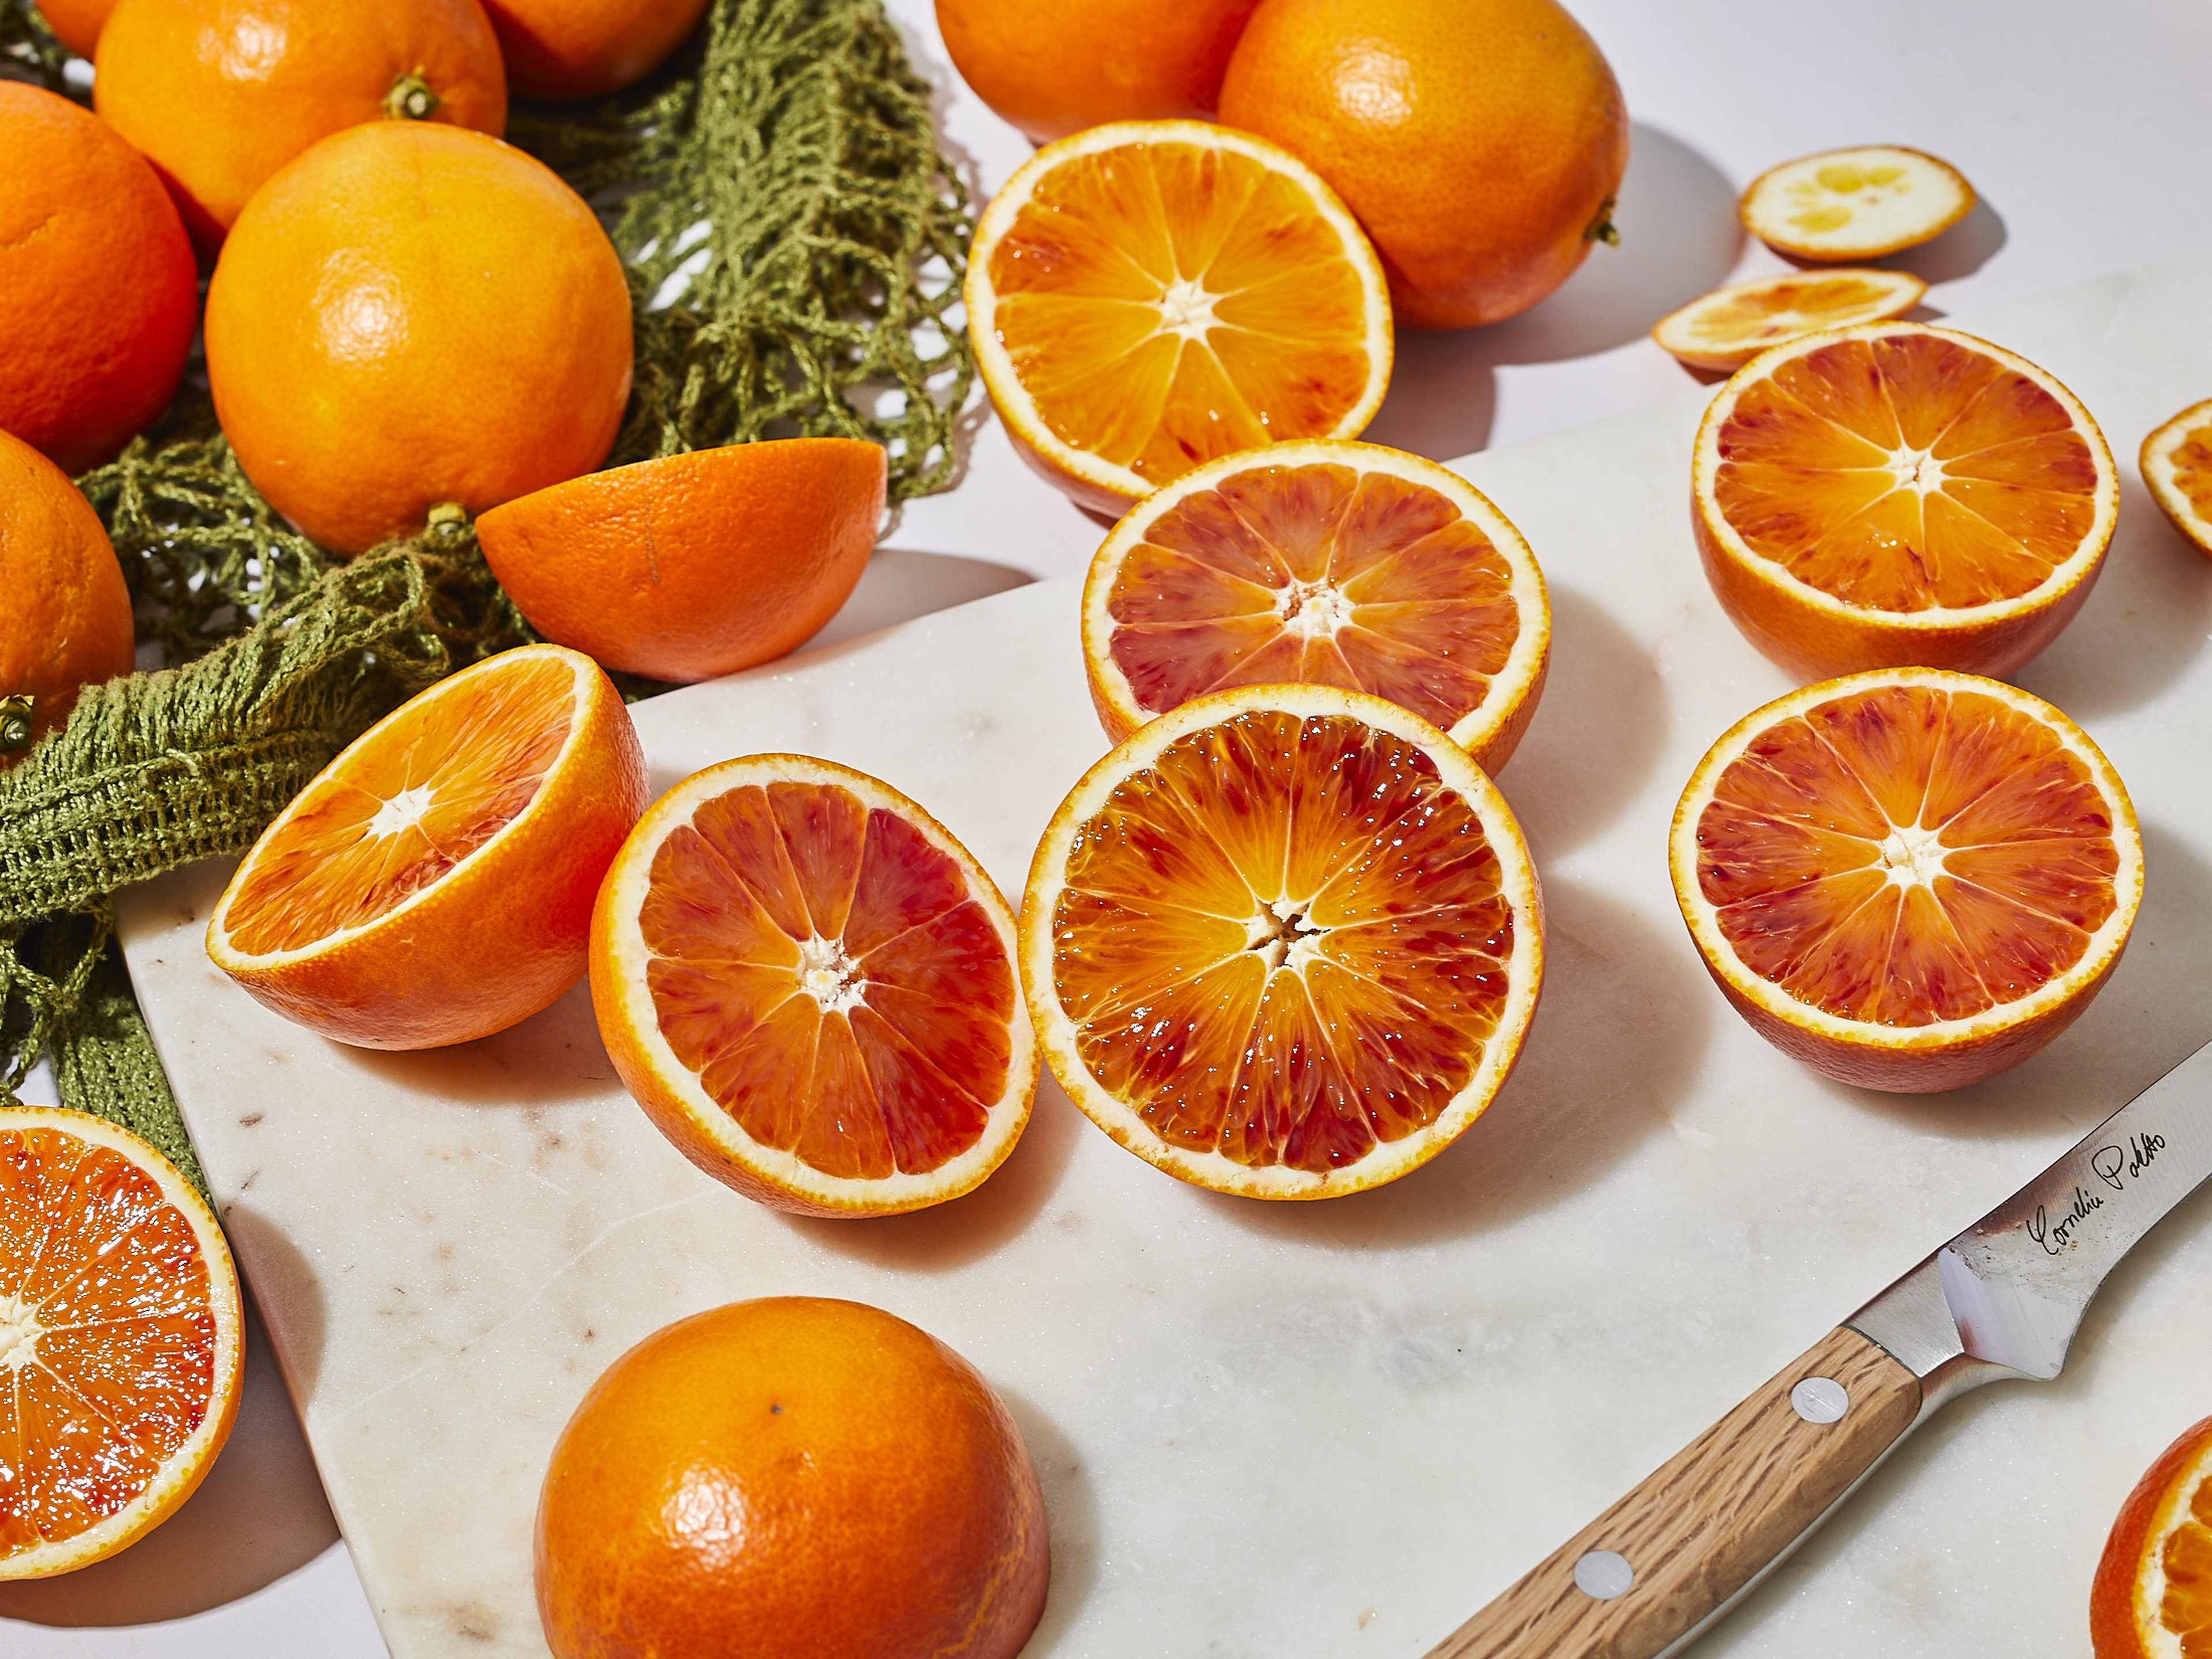 10 Types of Oranges You Need to Know